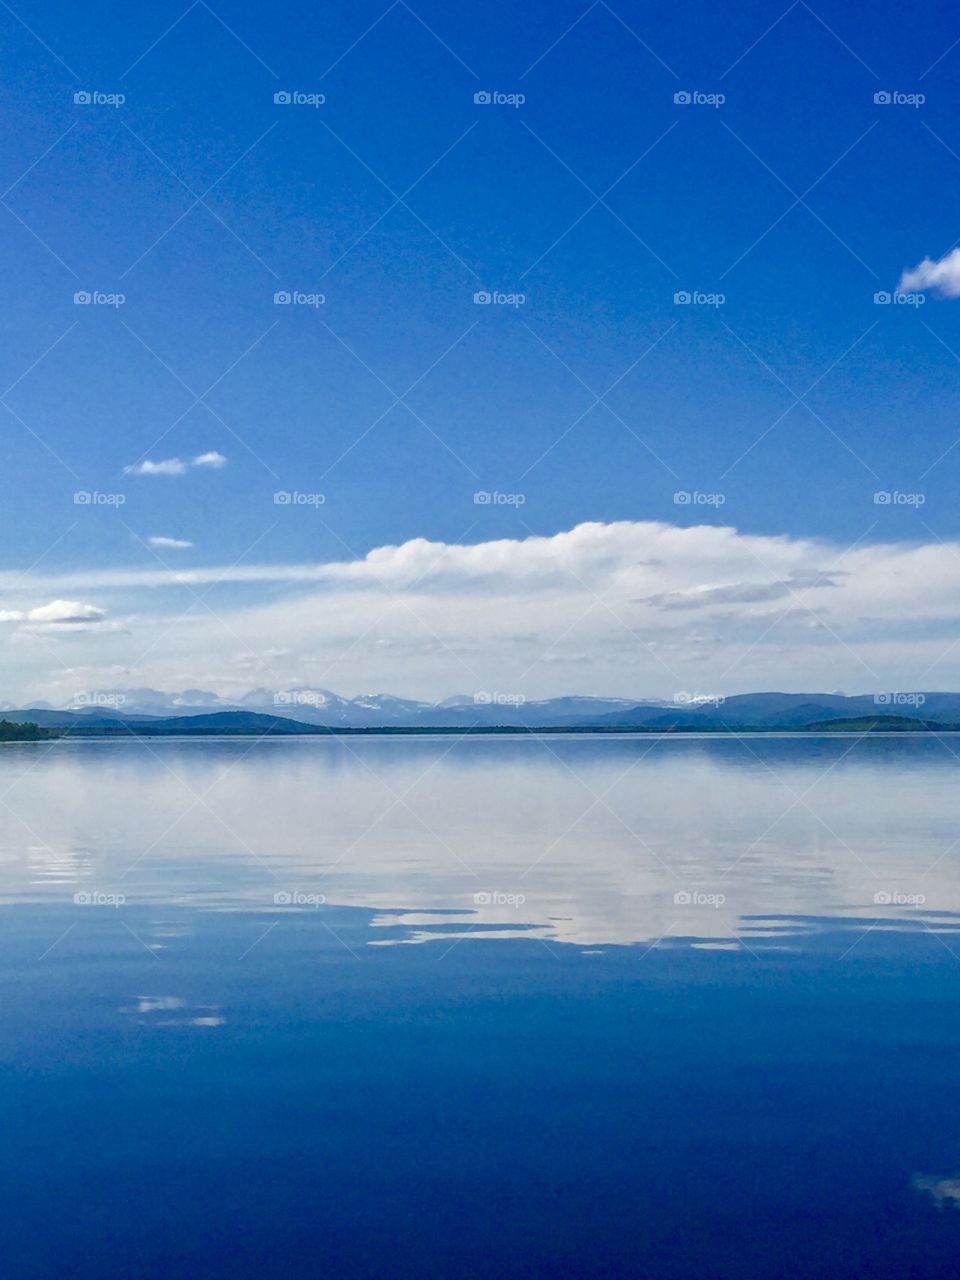 Summer, lake, mountains, water, reflections